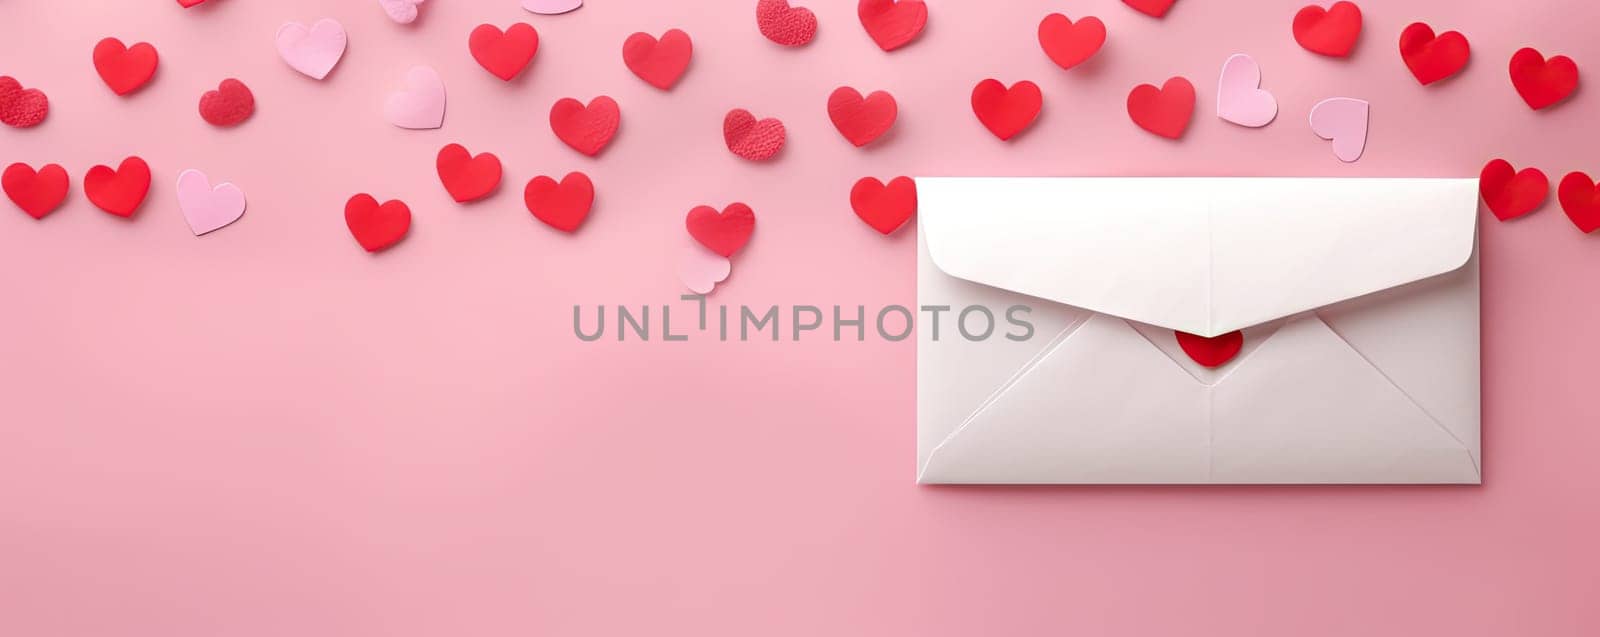 Envelope with hearts on pink background.